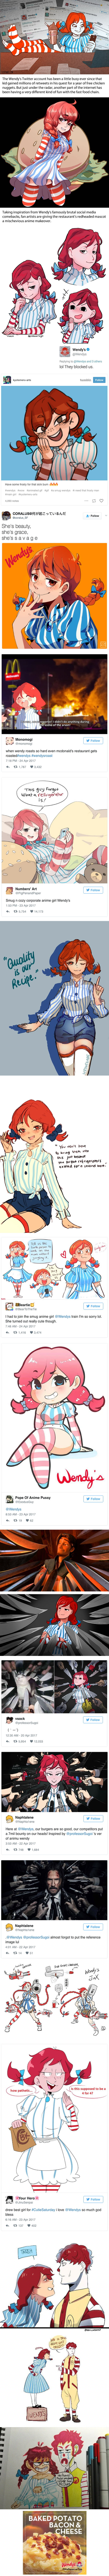 The Internet Turned Wendy's Twitter Into a Smug Anime Girl